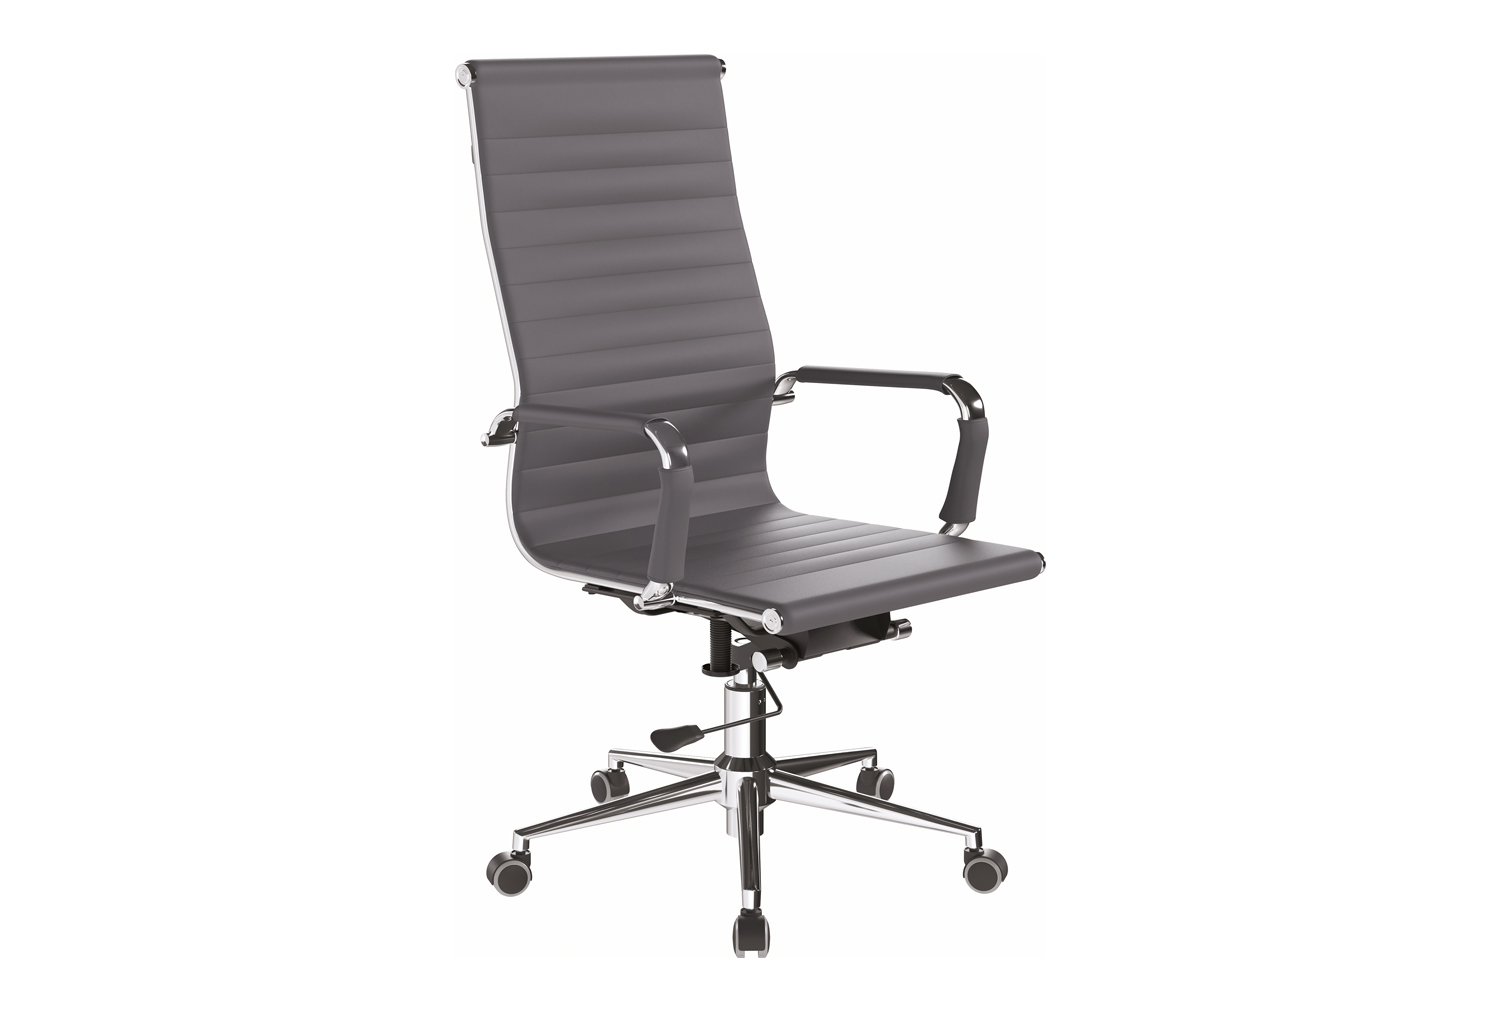 Andruzzi High Back Black Bonded Leather Executive Office Chair, Grey, Express Delivery